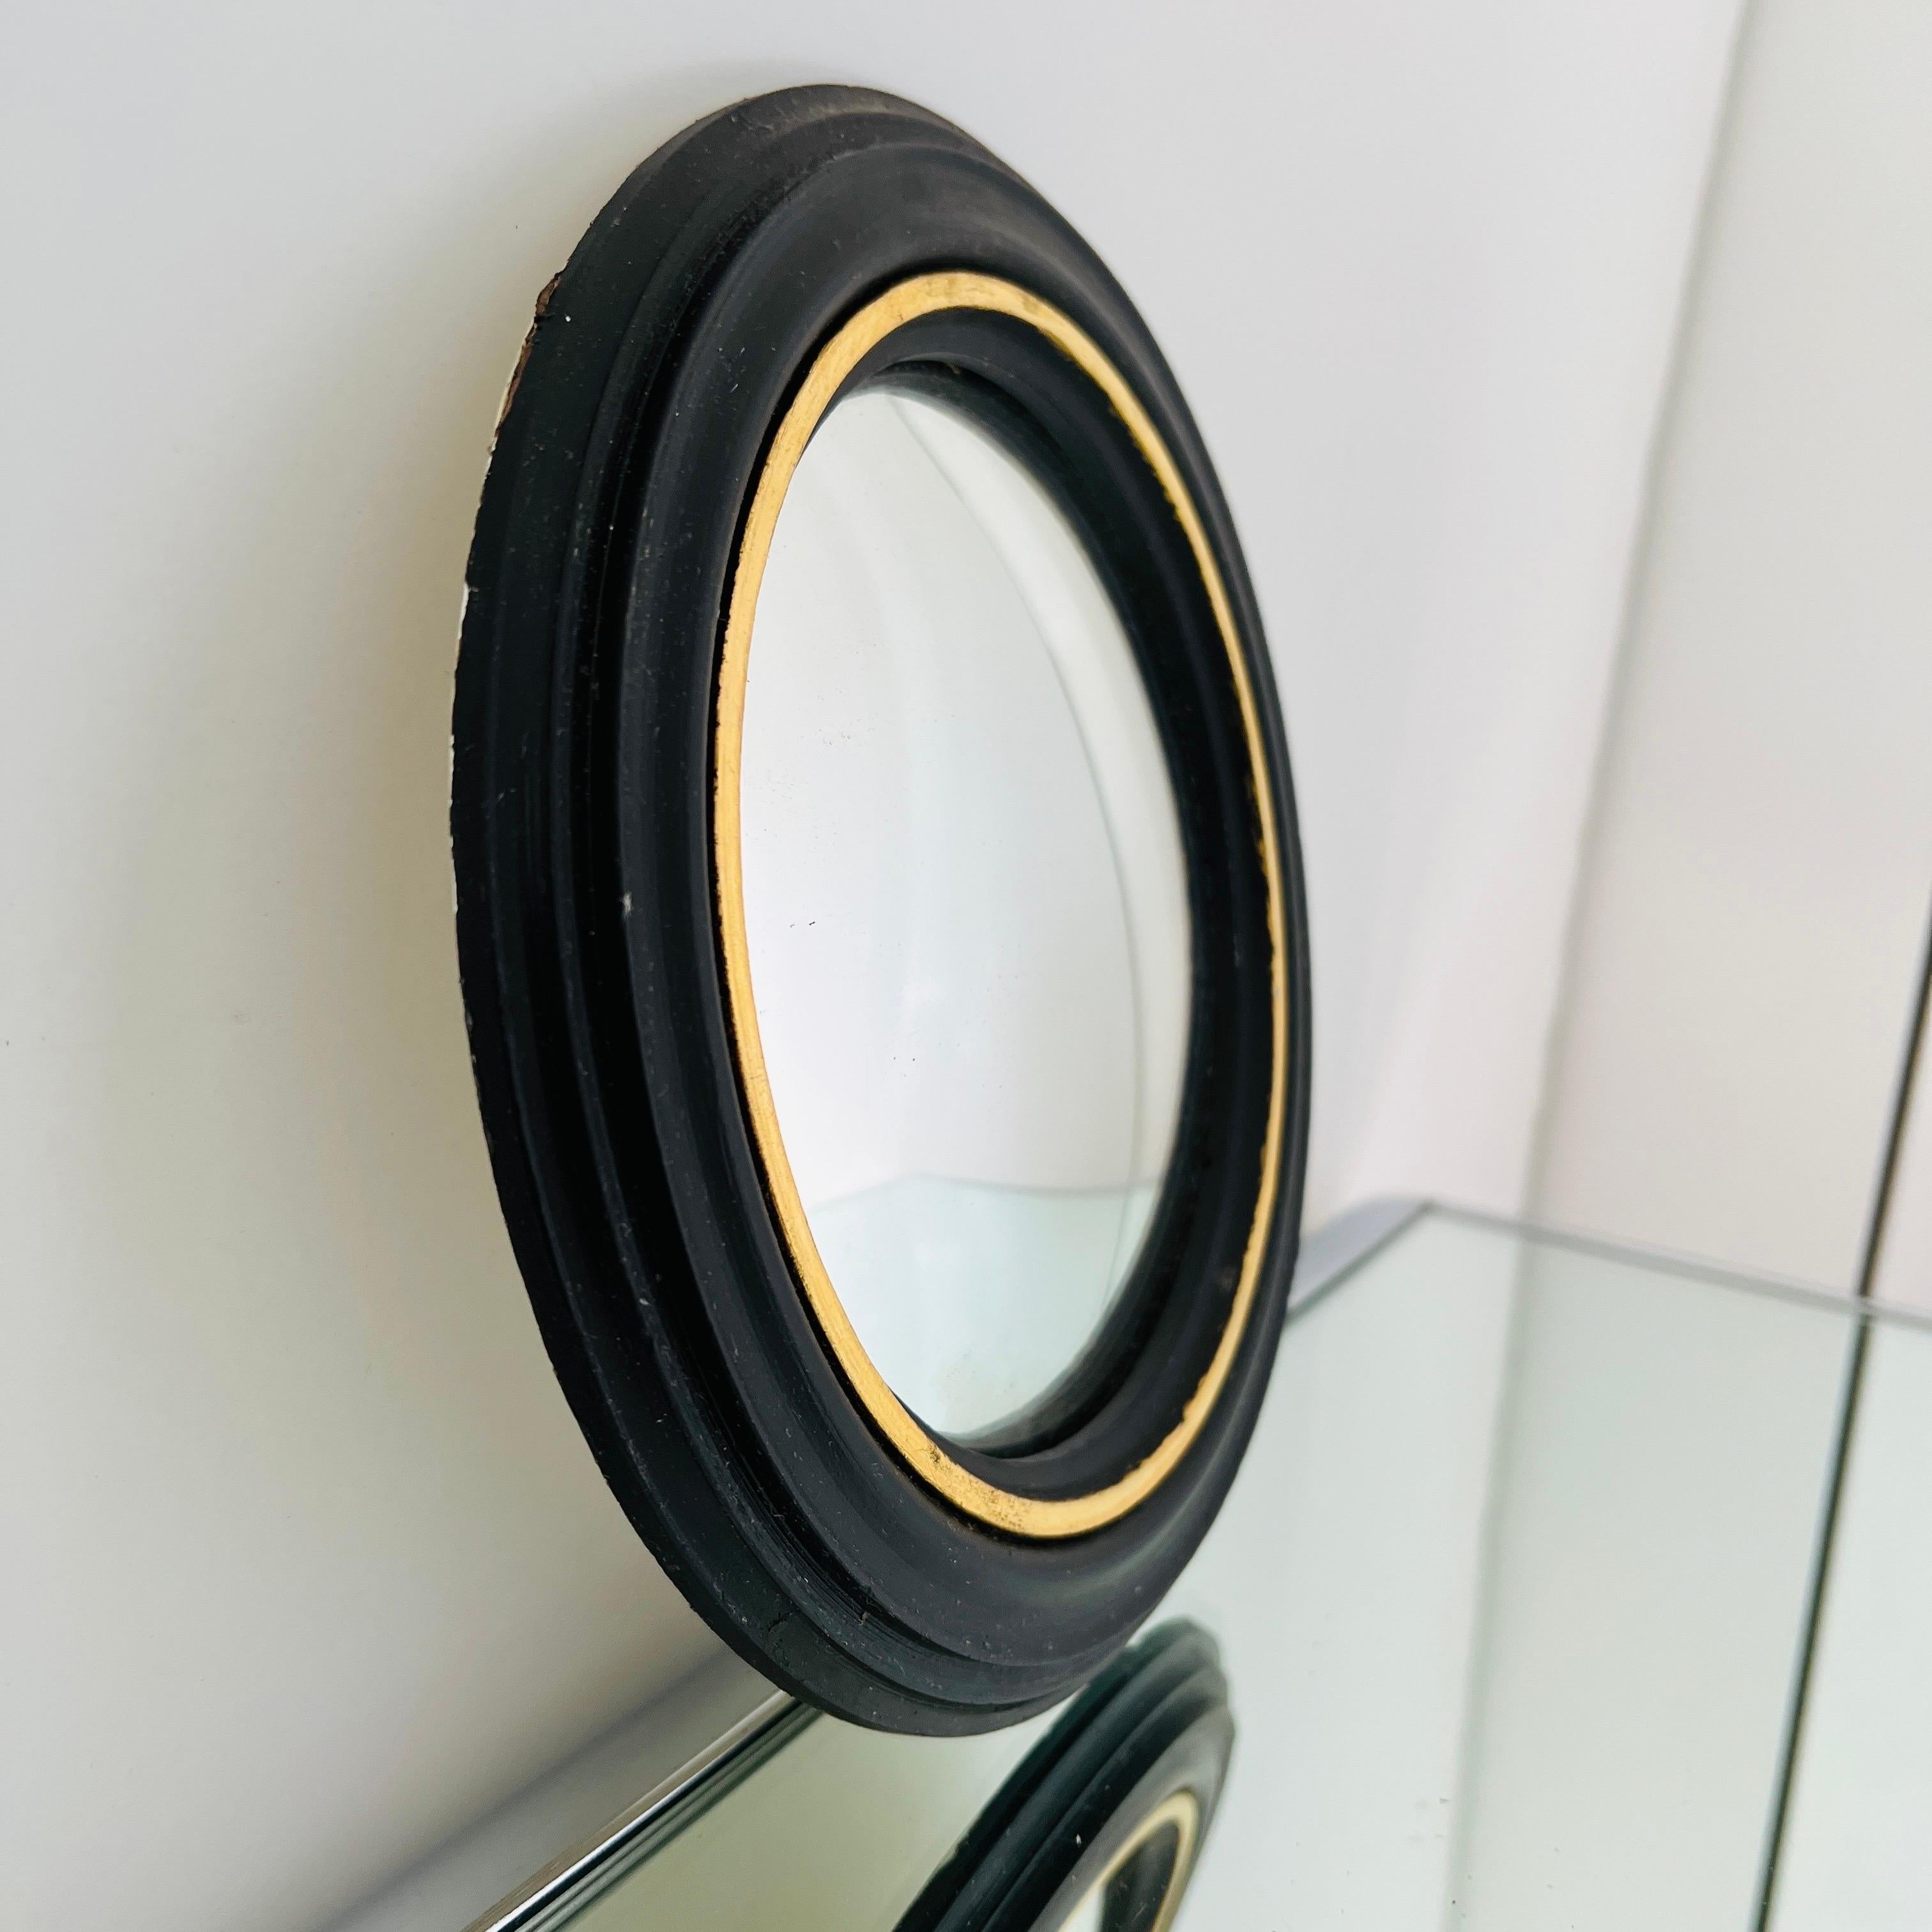 Late 20th Century Pair of Regency Convex Bullseye Mirrors in Black Plaster and Gold Leaf